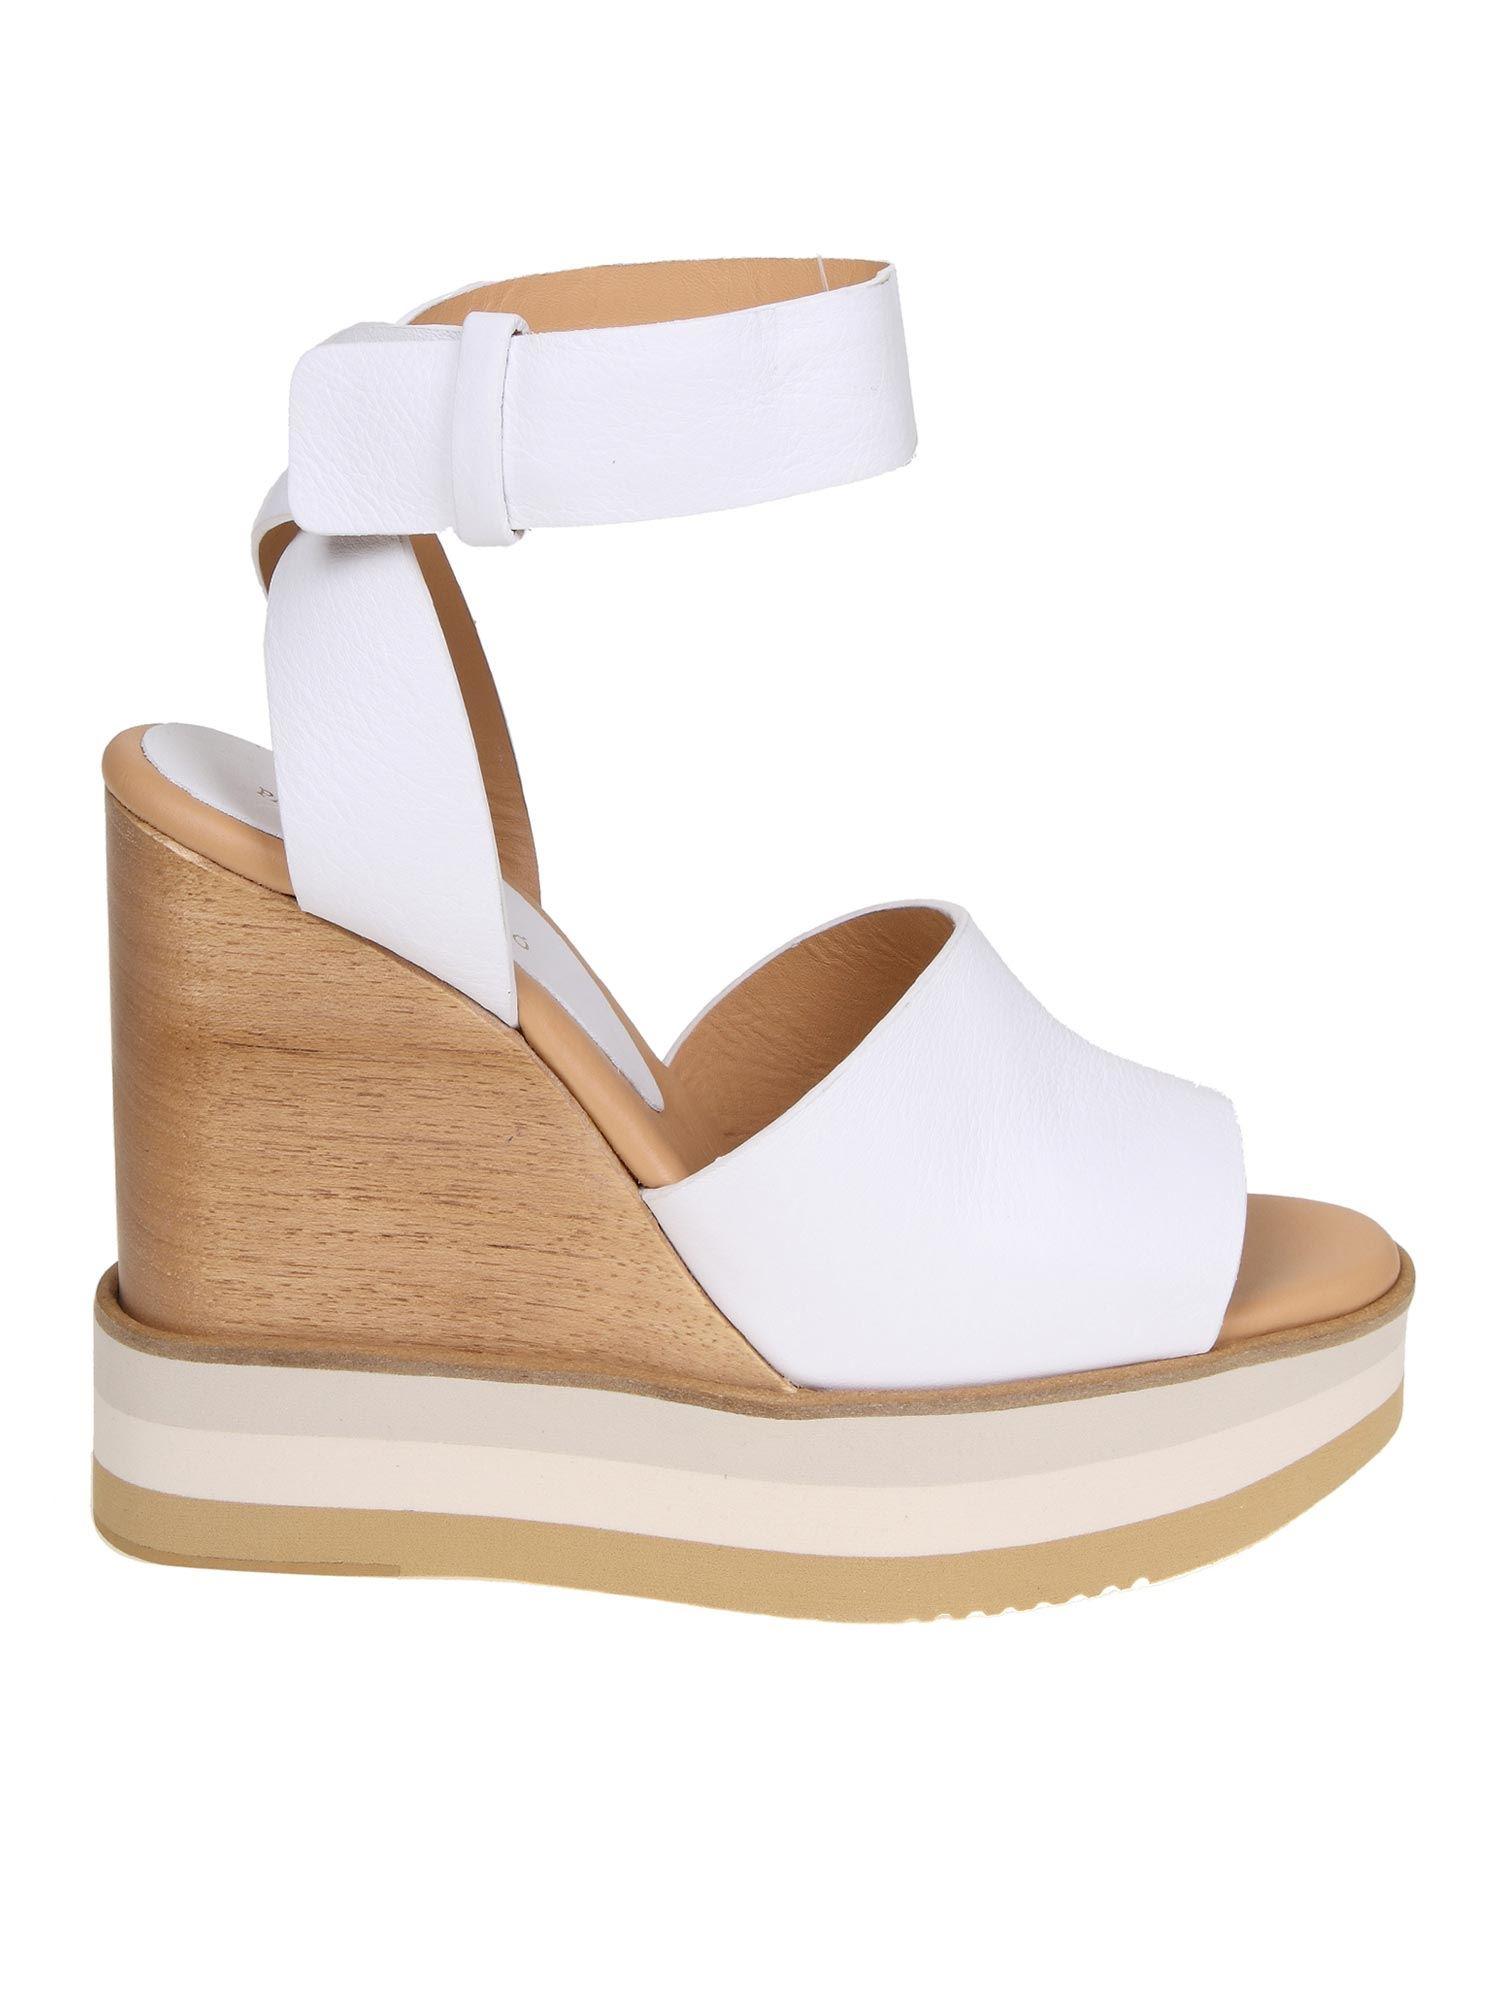 Paloma Barceló White Leather Sandals Lyst